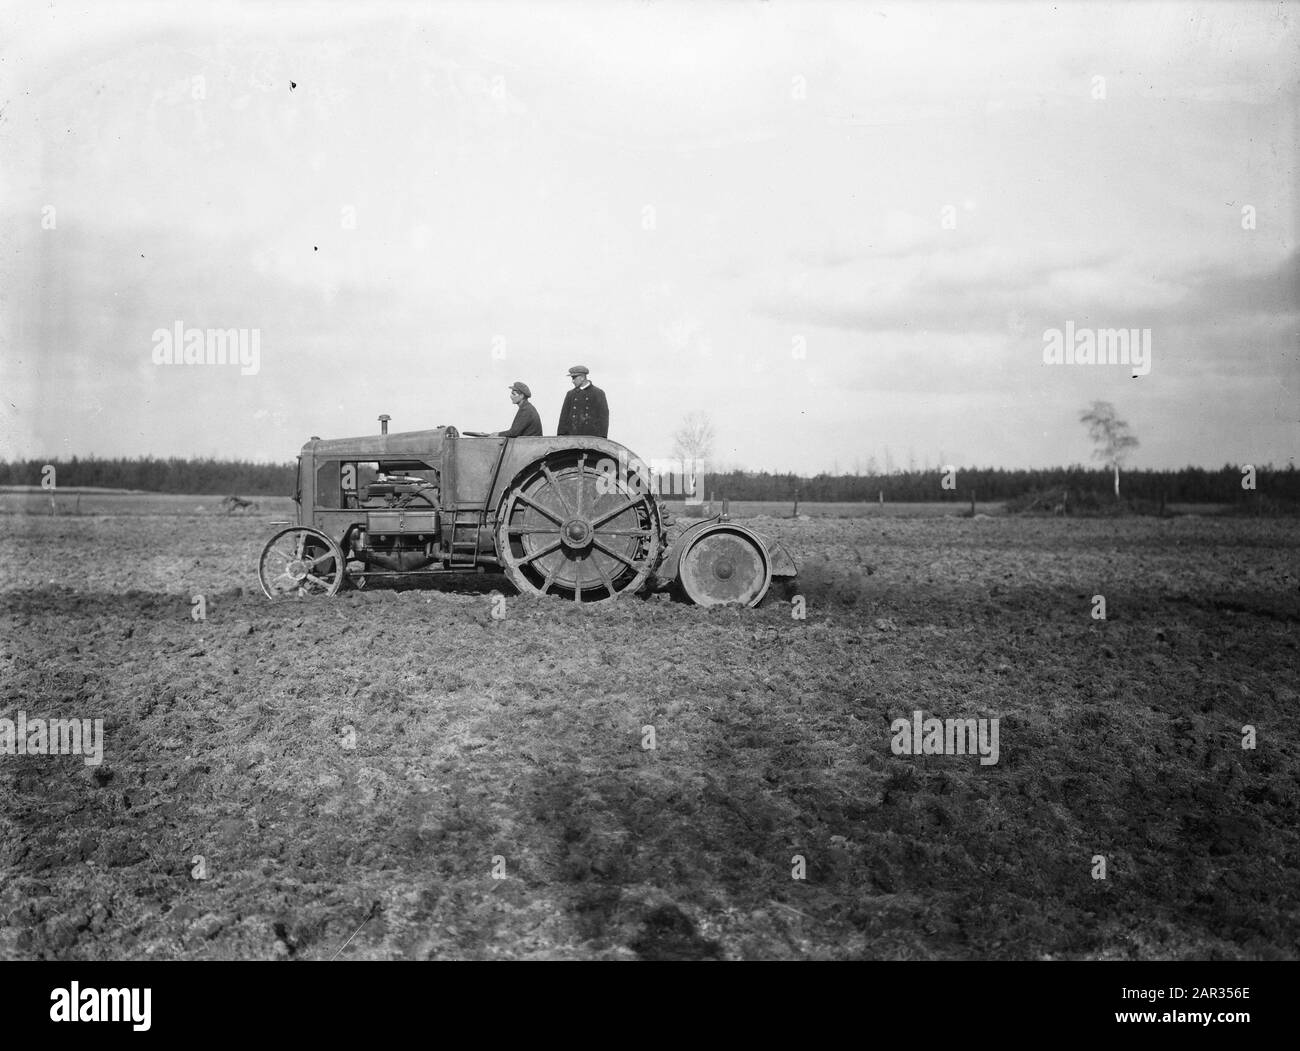 mining, tillage, leveling, shaving, agricultural engines, workers Date: undated Keywords: workers, squirts, leveling, groundworking, agricultural engines, mining Stock Photo